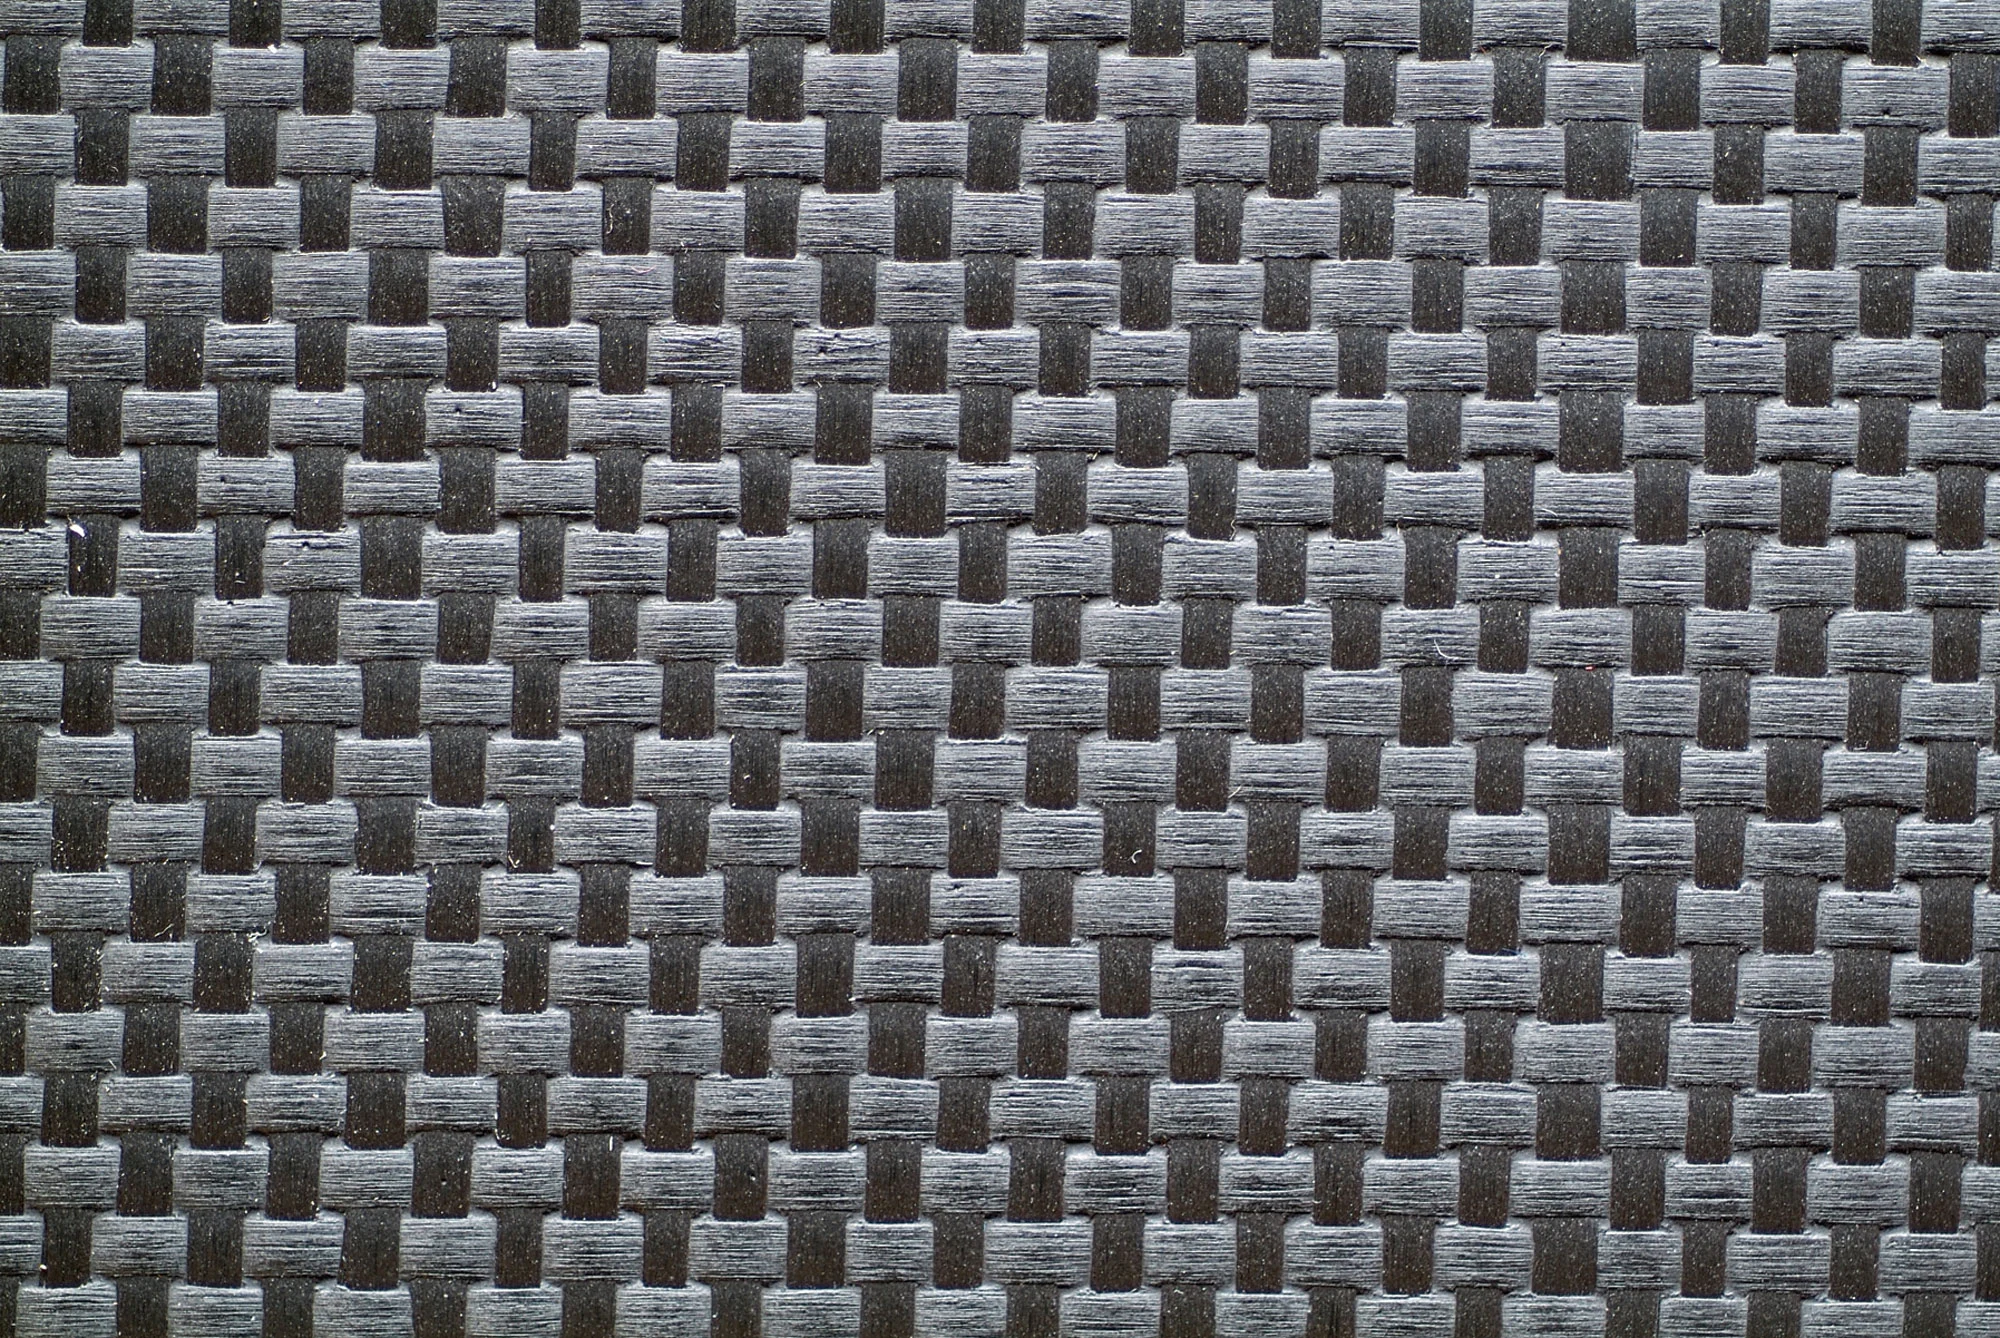 SEAT COVER, CARBON-LOOK